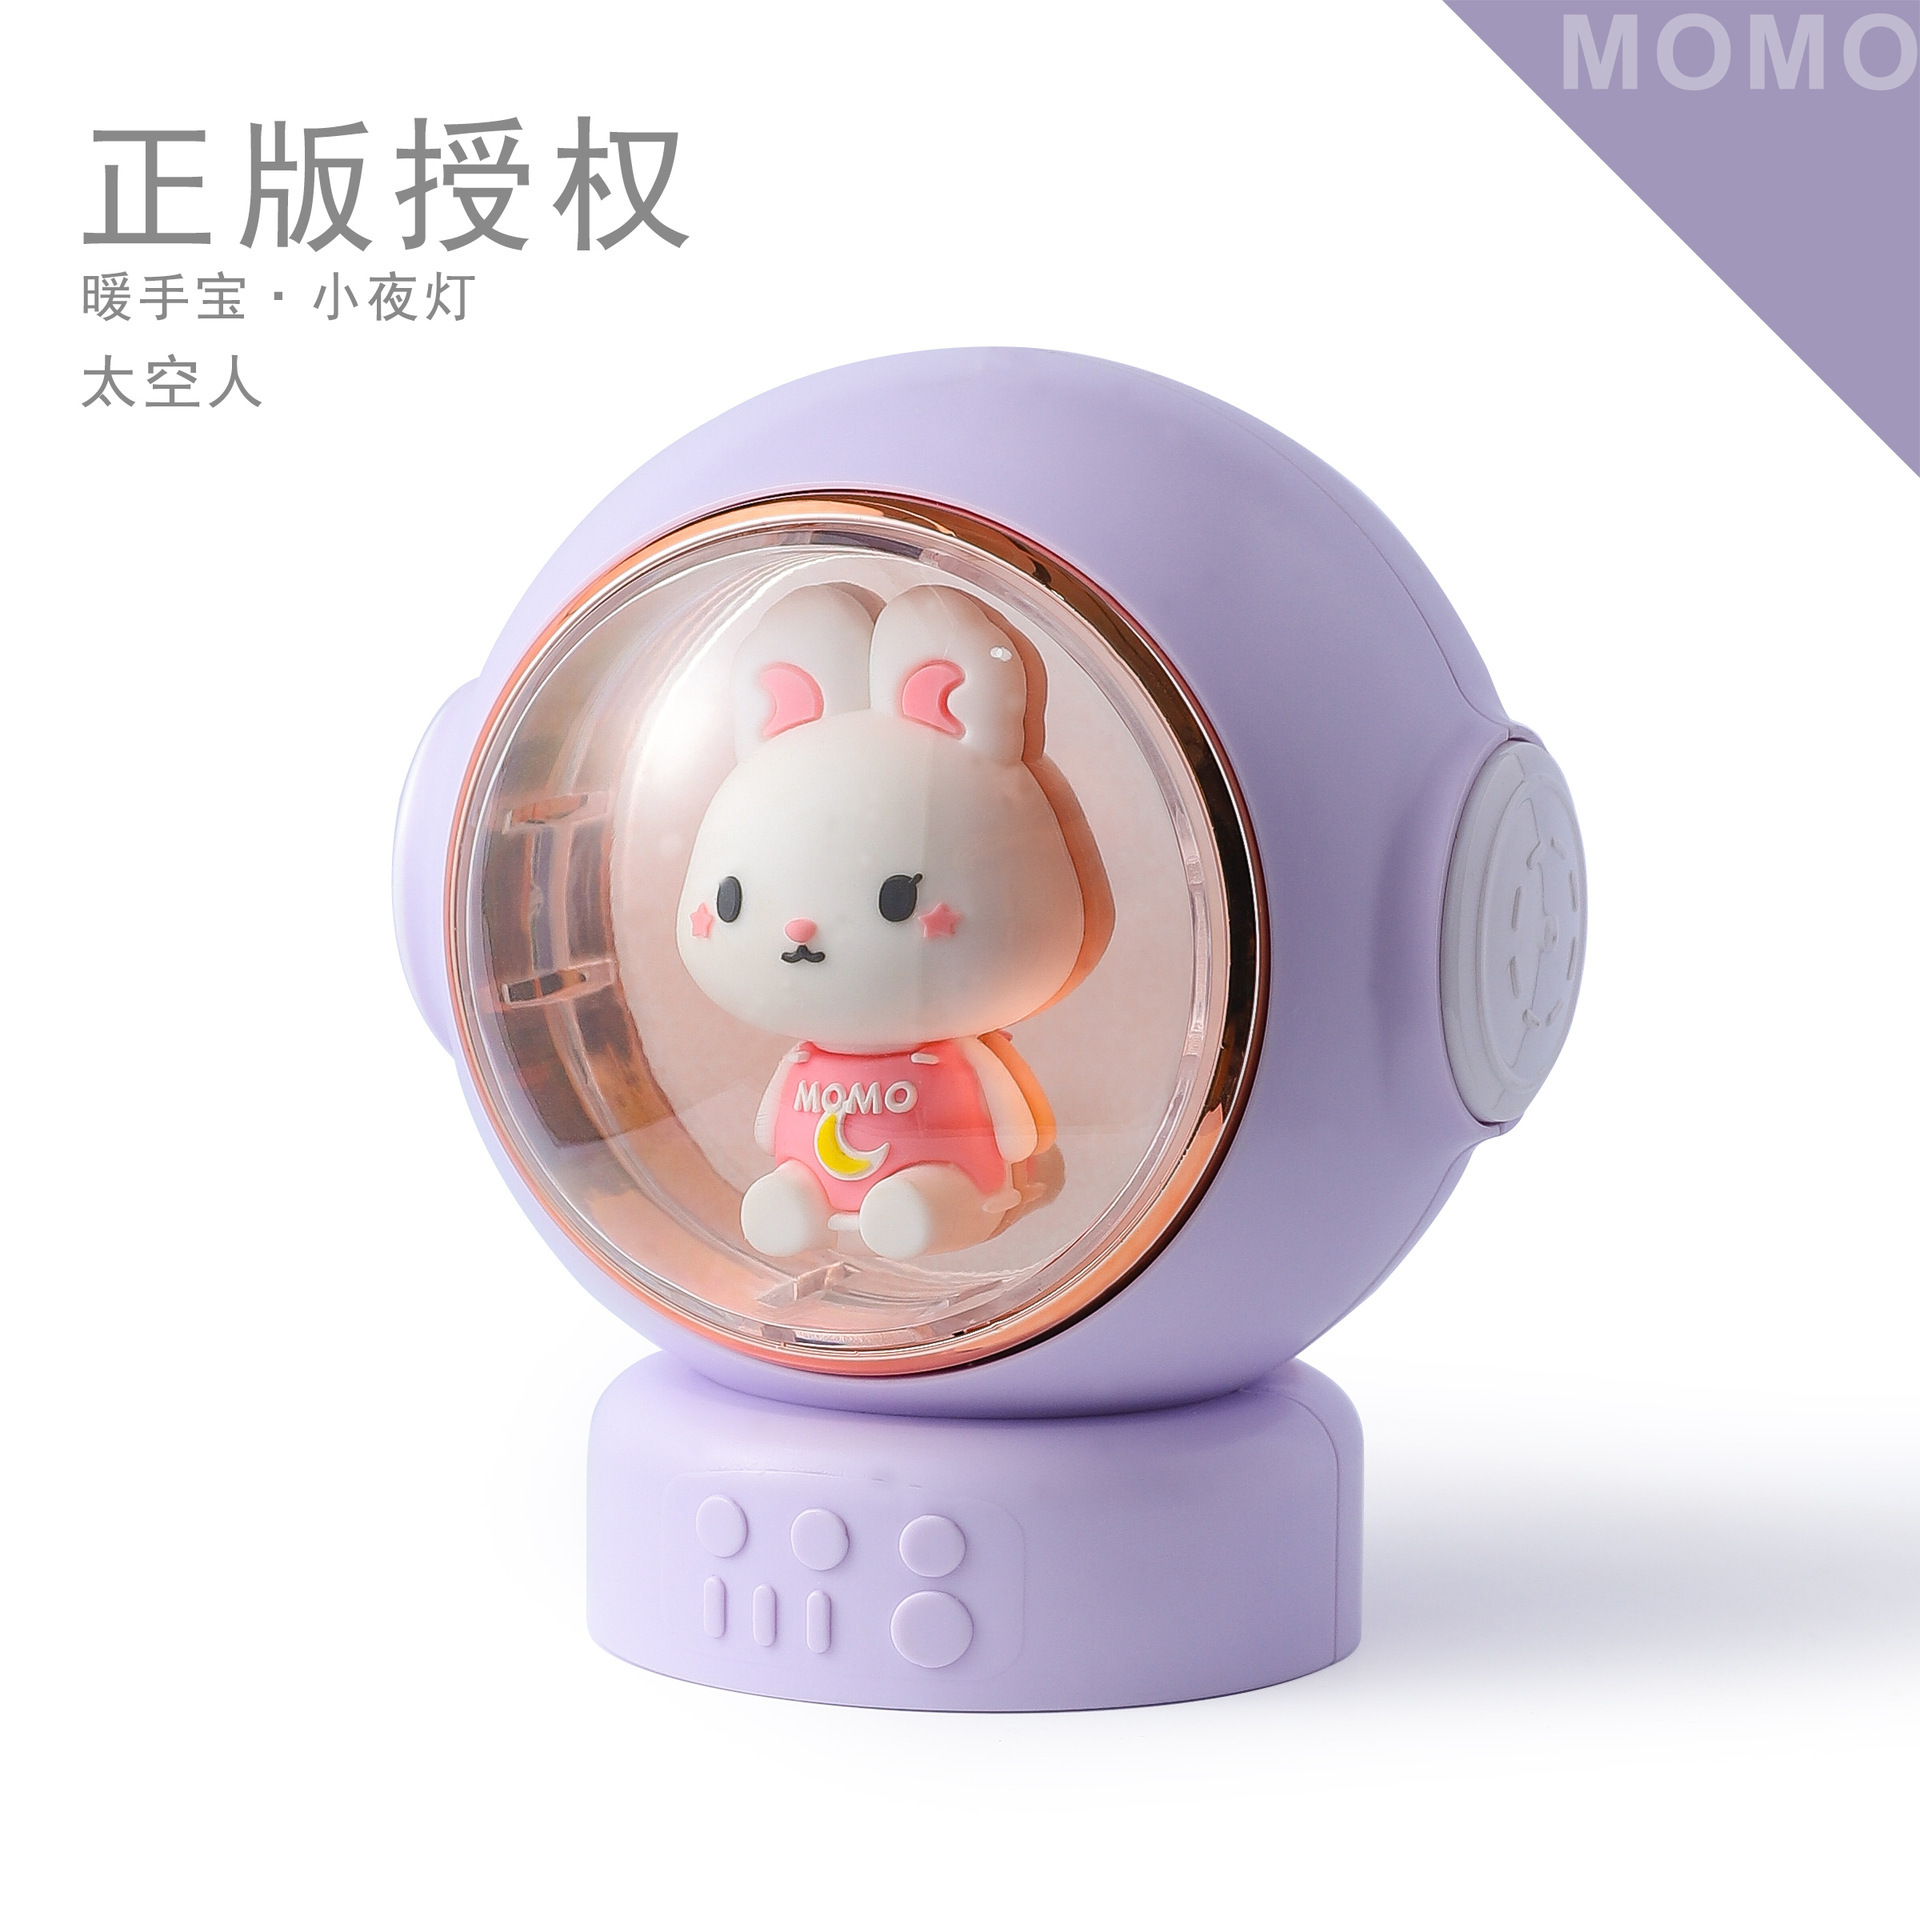 Creative Cartoon New Space Capsule Spaceman 2-in-1 Smart Hand Warmer Gift USB Charging Portable